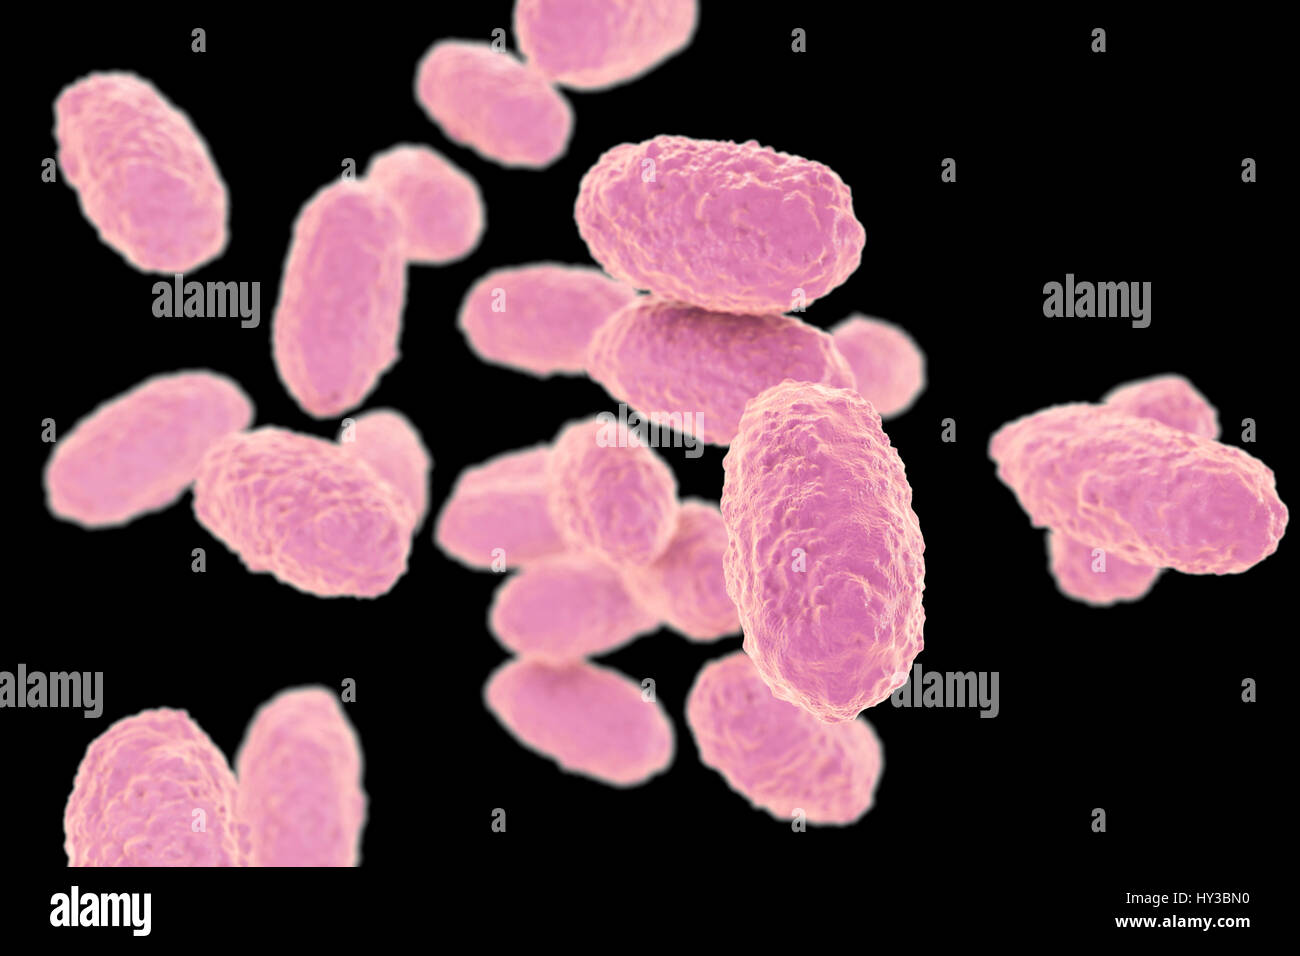 Whooping cough bacteria (Bordetella pertussis), computer illustration. B. pertussis are gram-negative, aerobic, non-motile, coccobacillus bacteria. They are spread by coughing and by nasal drops. The incubation period is 7-14 days. A vaccine is available for this bacterial pathogen. Pertussis vaccine is part of the DTaP (diphtheria, tetanus, acellular pertussis) immunization. B. pertussis also produces a lymphocytosis-promoting factor, which causes a decrease in the entry of lymphocytes into lymph nodes. This can lead to a condition known as lymphocytosis. Stock Photo